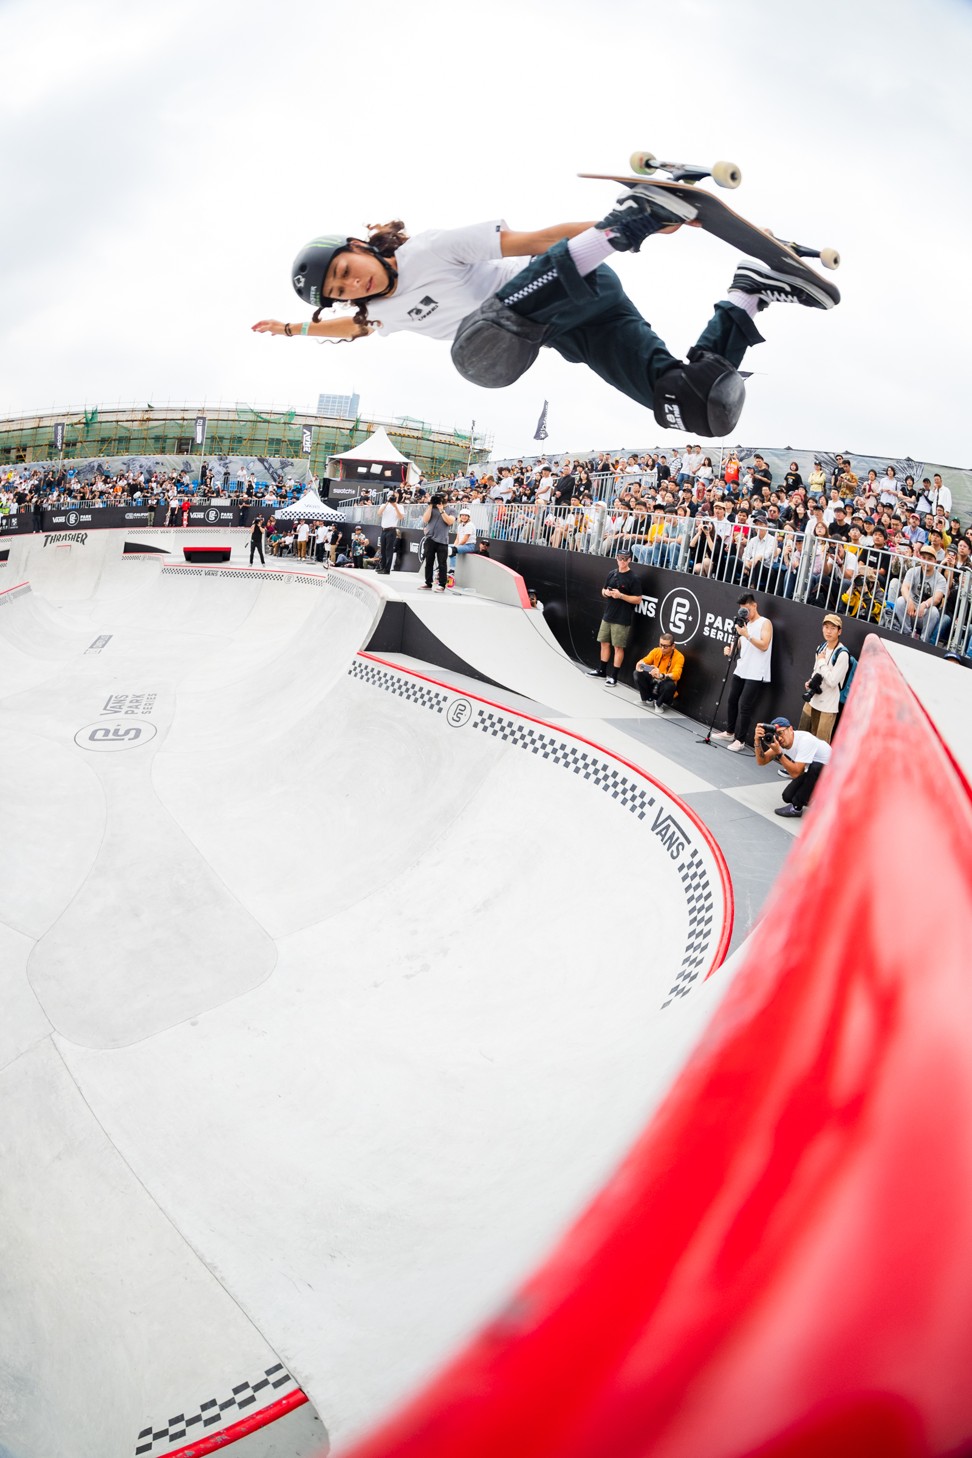 Lizzie Armanto competes at the 2019 Vans Park Series Pro Tour, Shanghai, China. Photo: Anthony Acosta.